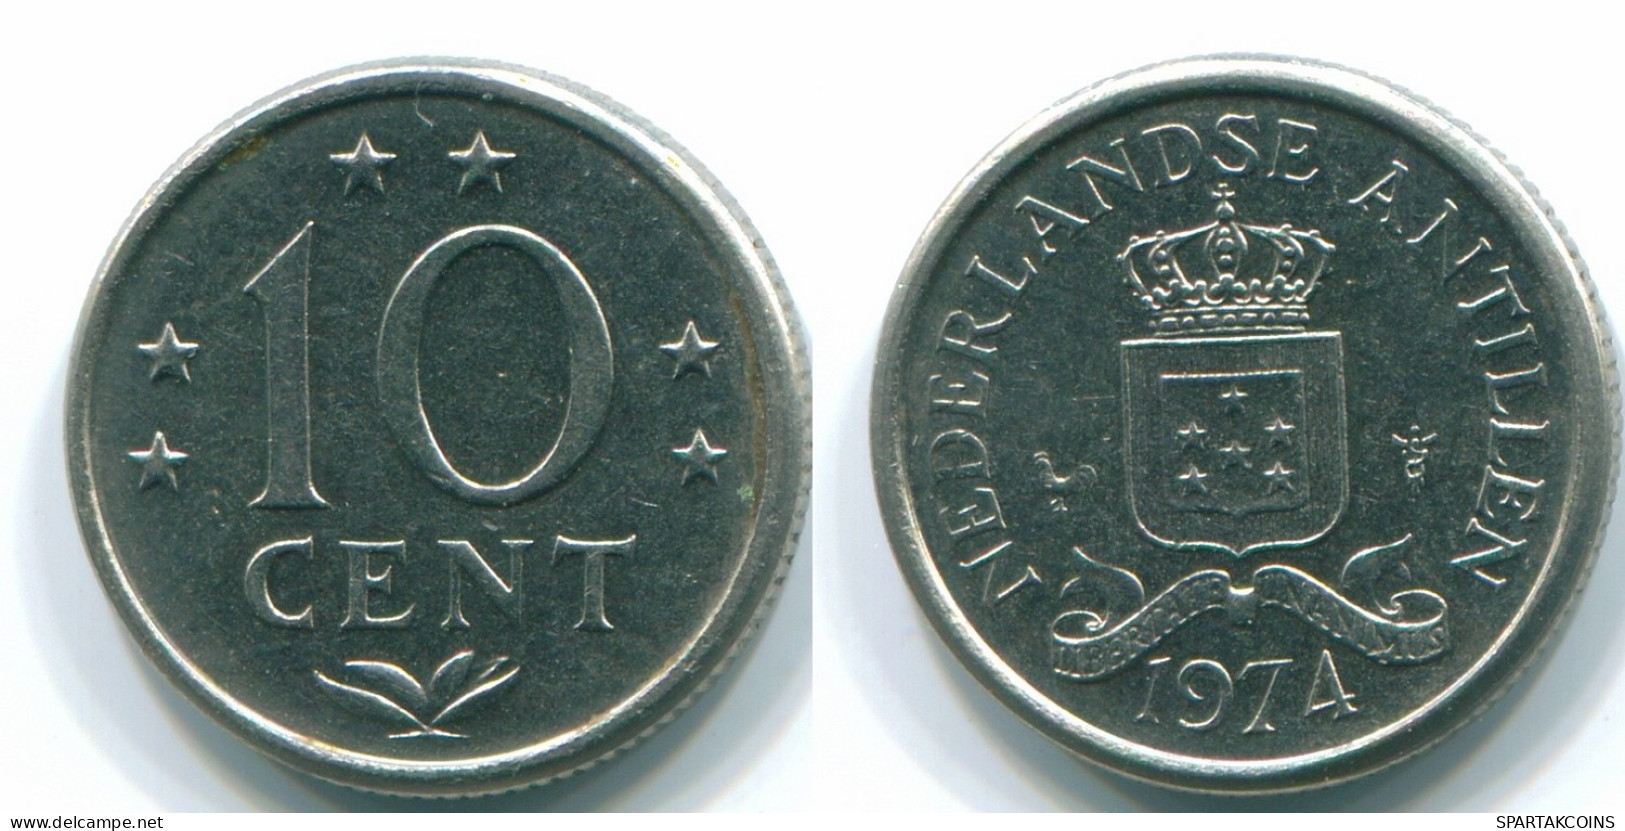 10 CENTS 1974 NETHERLANDS ANTILLES Nickel Colonial Coin #S13495.U.A - Netherlands Antilles